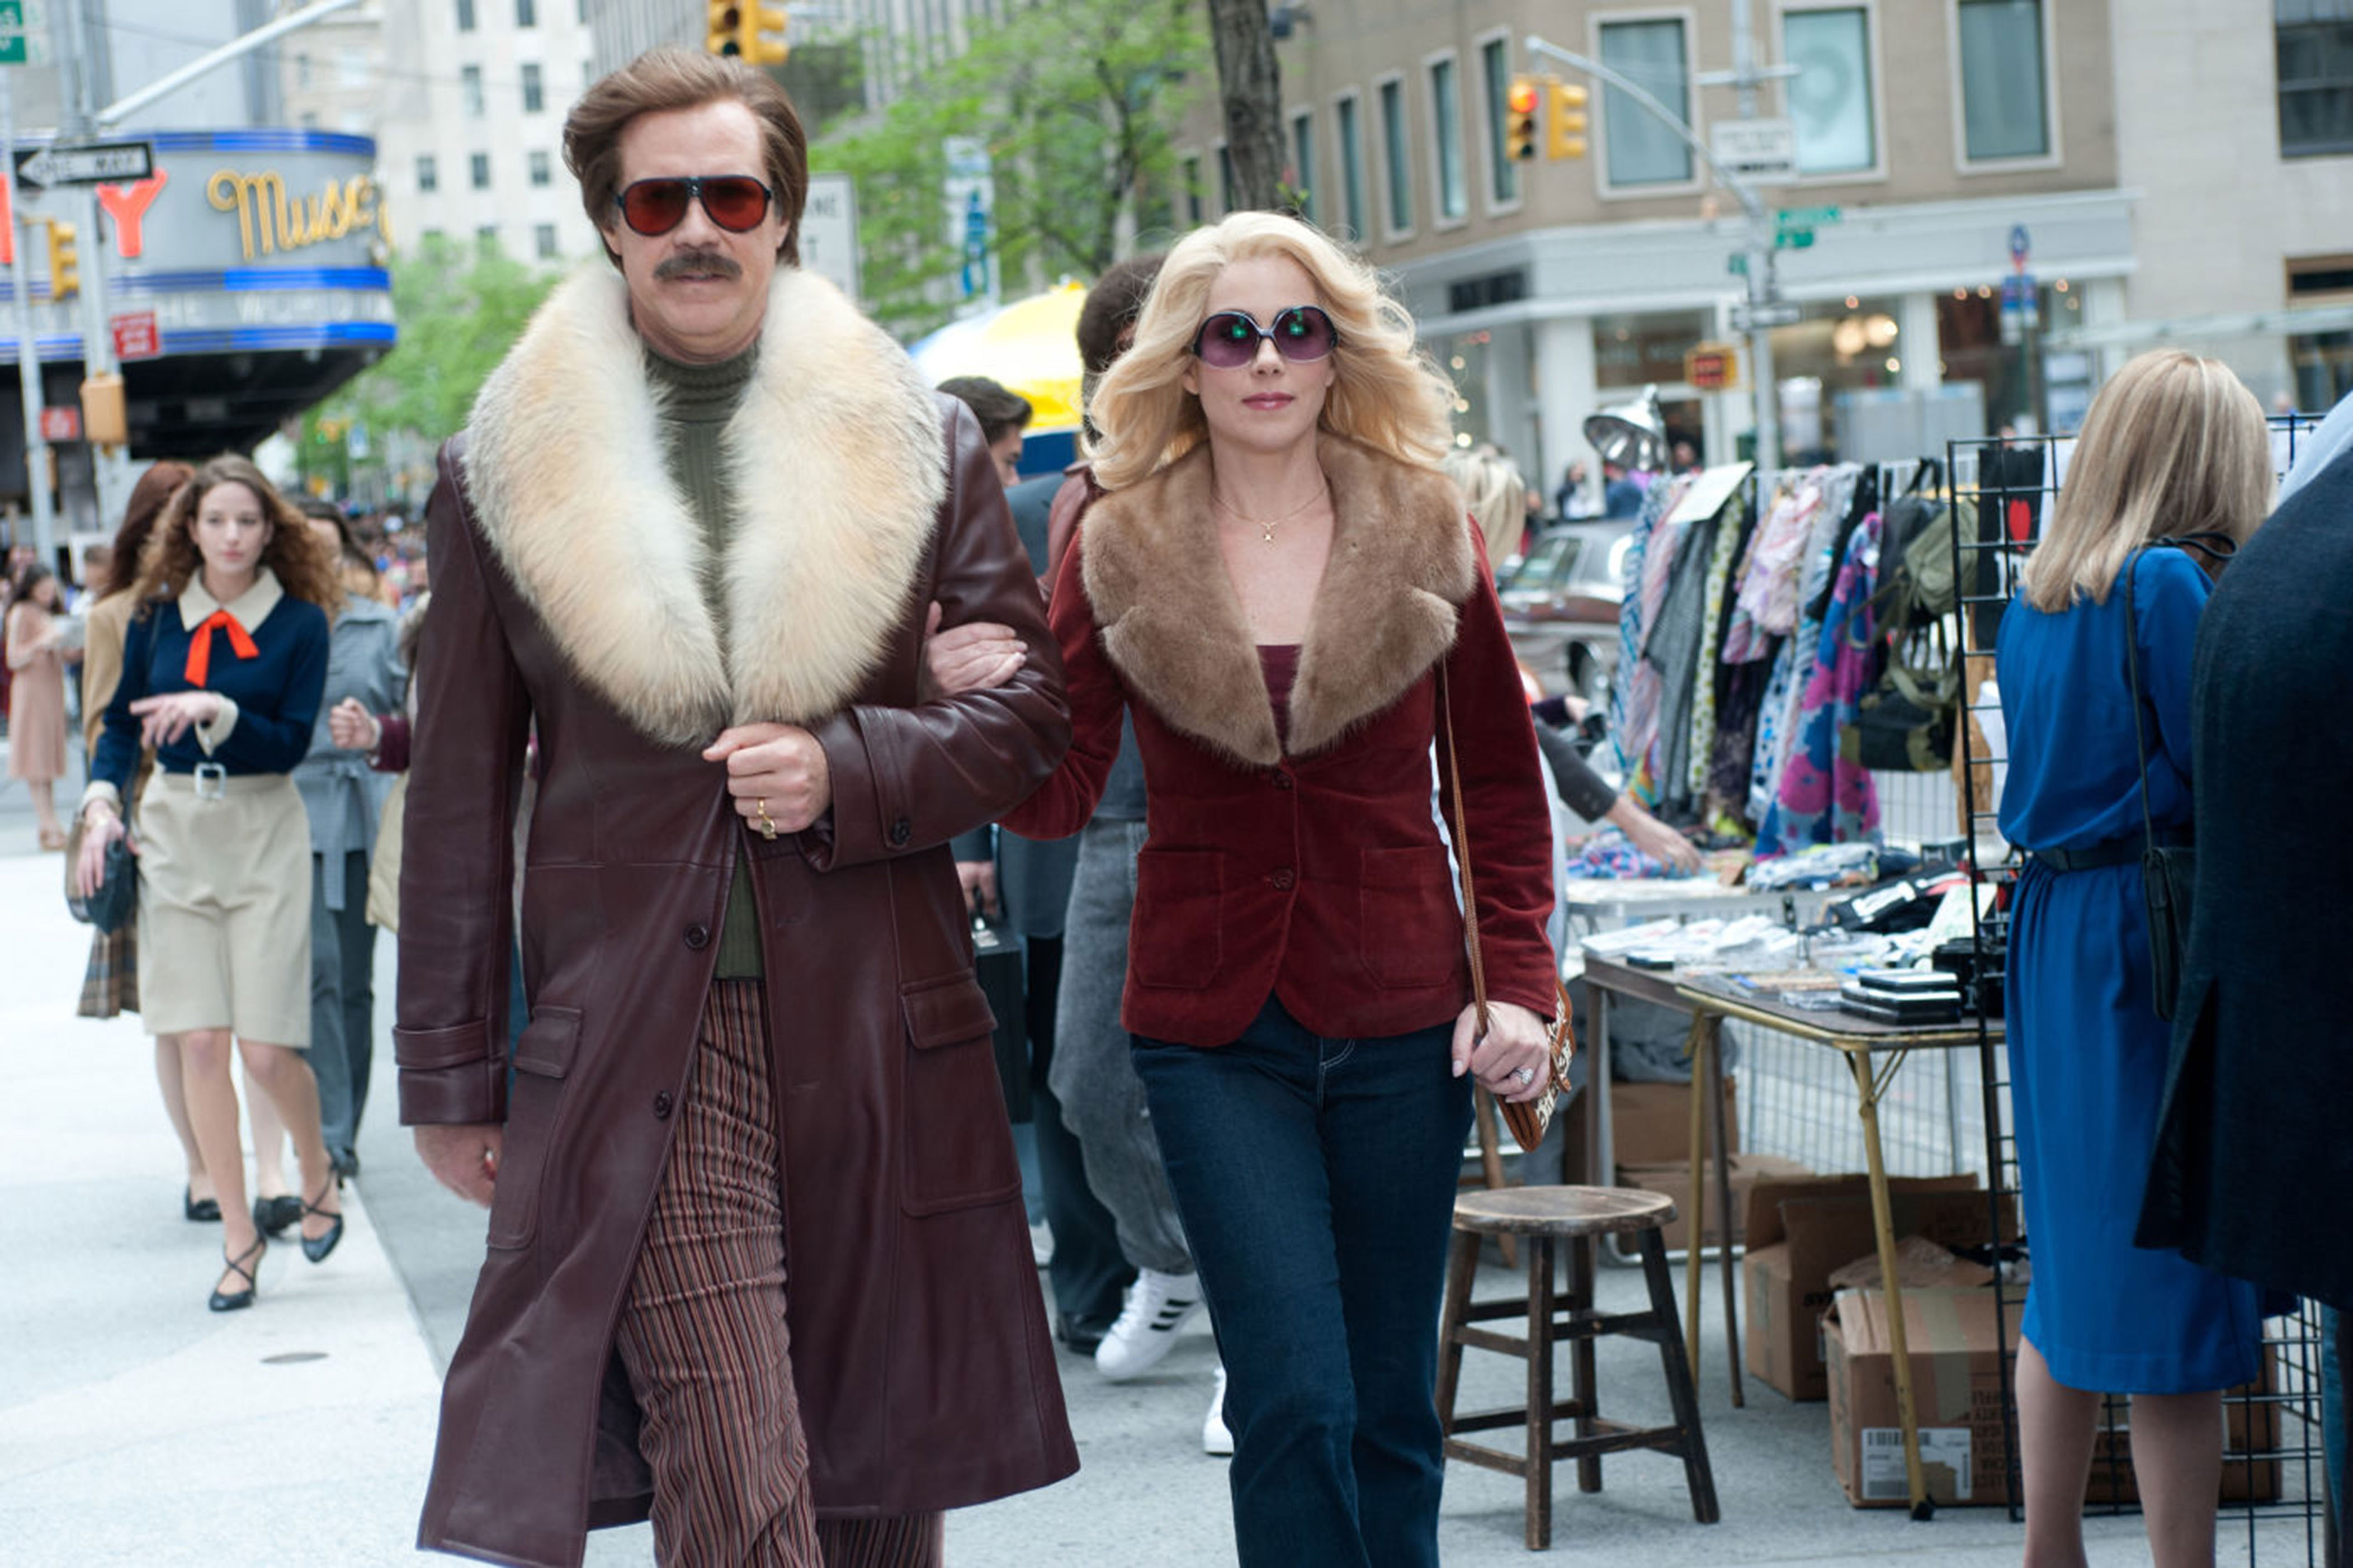 <p>More Ron Burgundy? Yes, please! Will Ferrell's second take on Ron Burgundy was surprisingly more entertaining and more hilarious than the first (we didn't think it was possible!). The sequel earned rave reviews and was a huge box office success, grossing $173 million worldwide on a $50 million budget.</p>